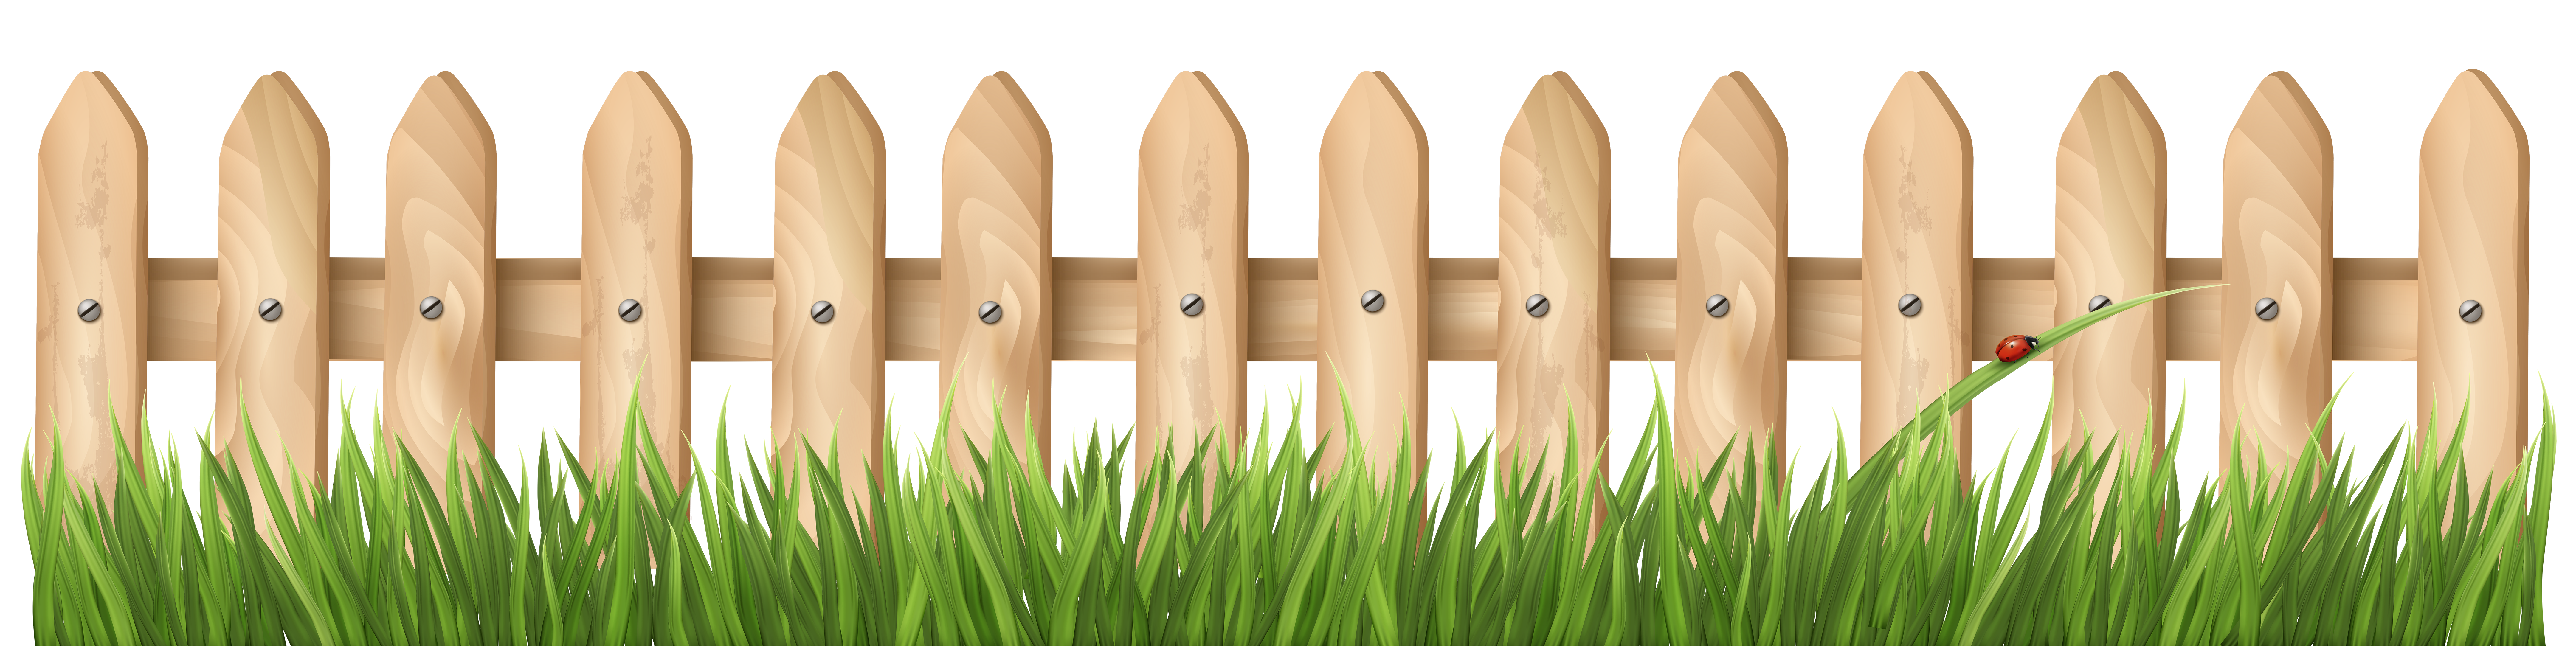 Transparent with grass png. Clipart road fence